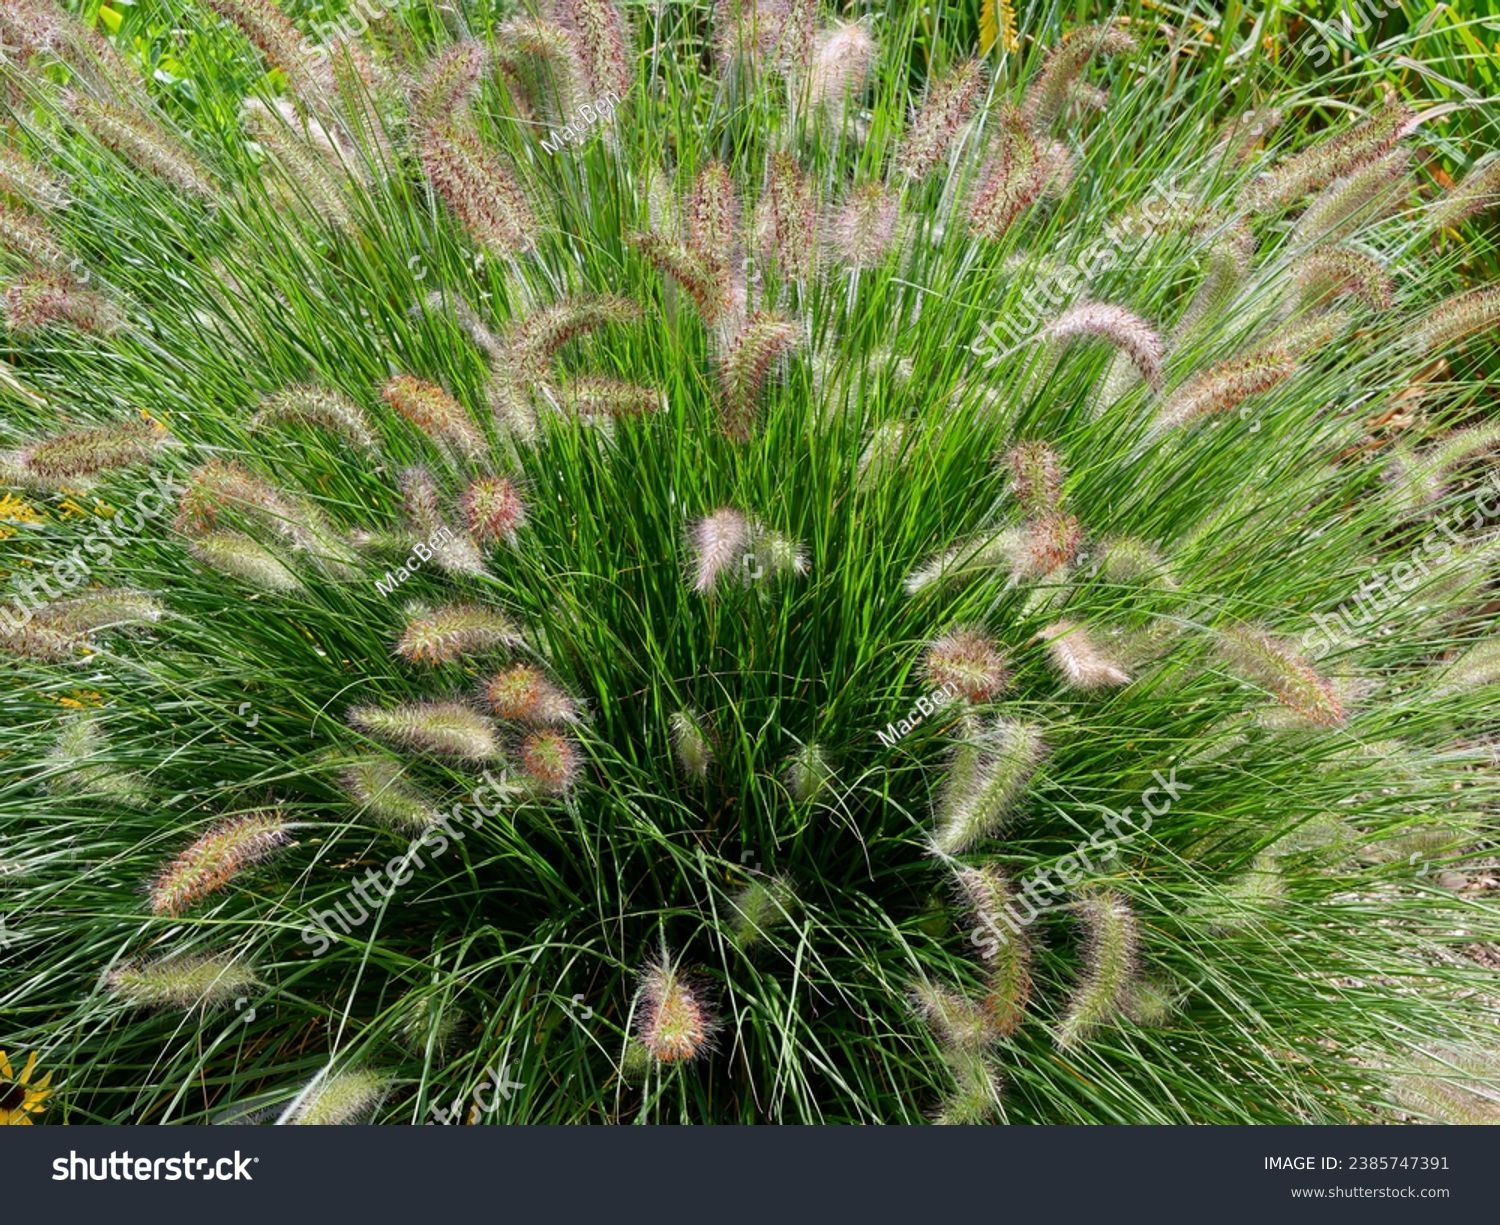 (Pennisetum alopecuroides) Chinese fountaingrass or dwarf fontain grass, climbing grass on long graceful stems with pink-white to brownish flowers in spikes and basal long dark-green  foliage #2385747391